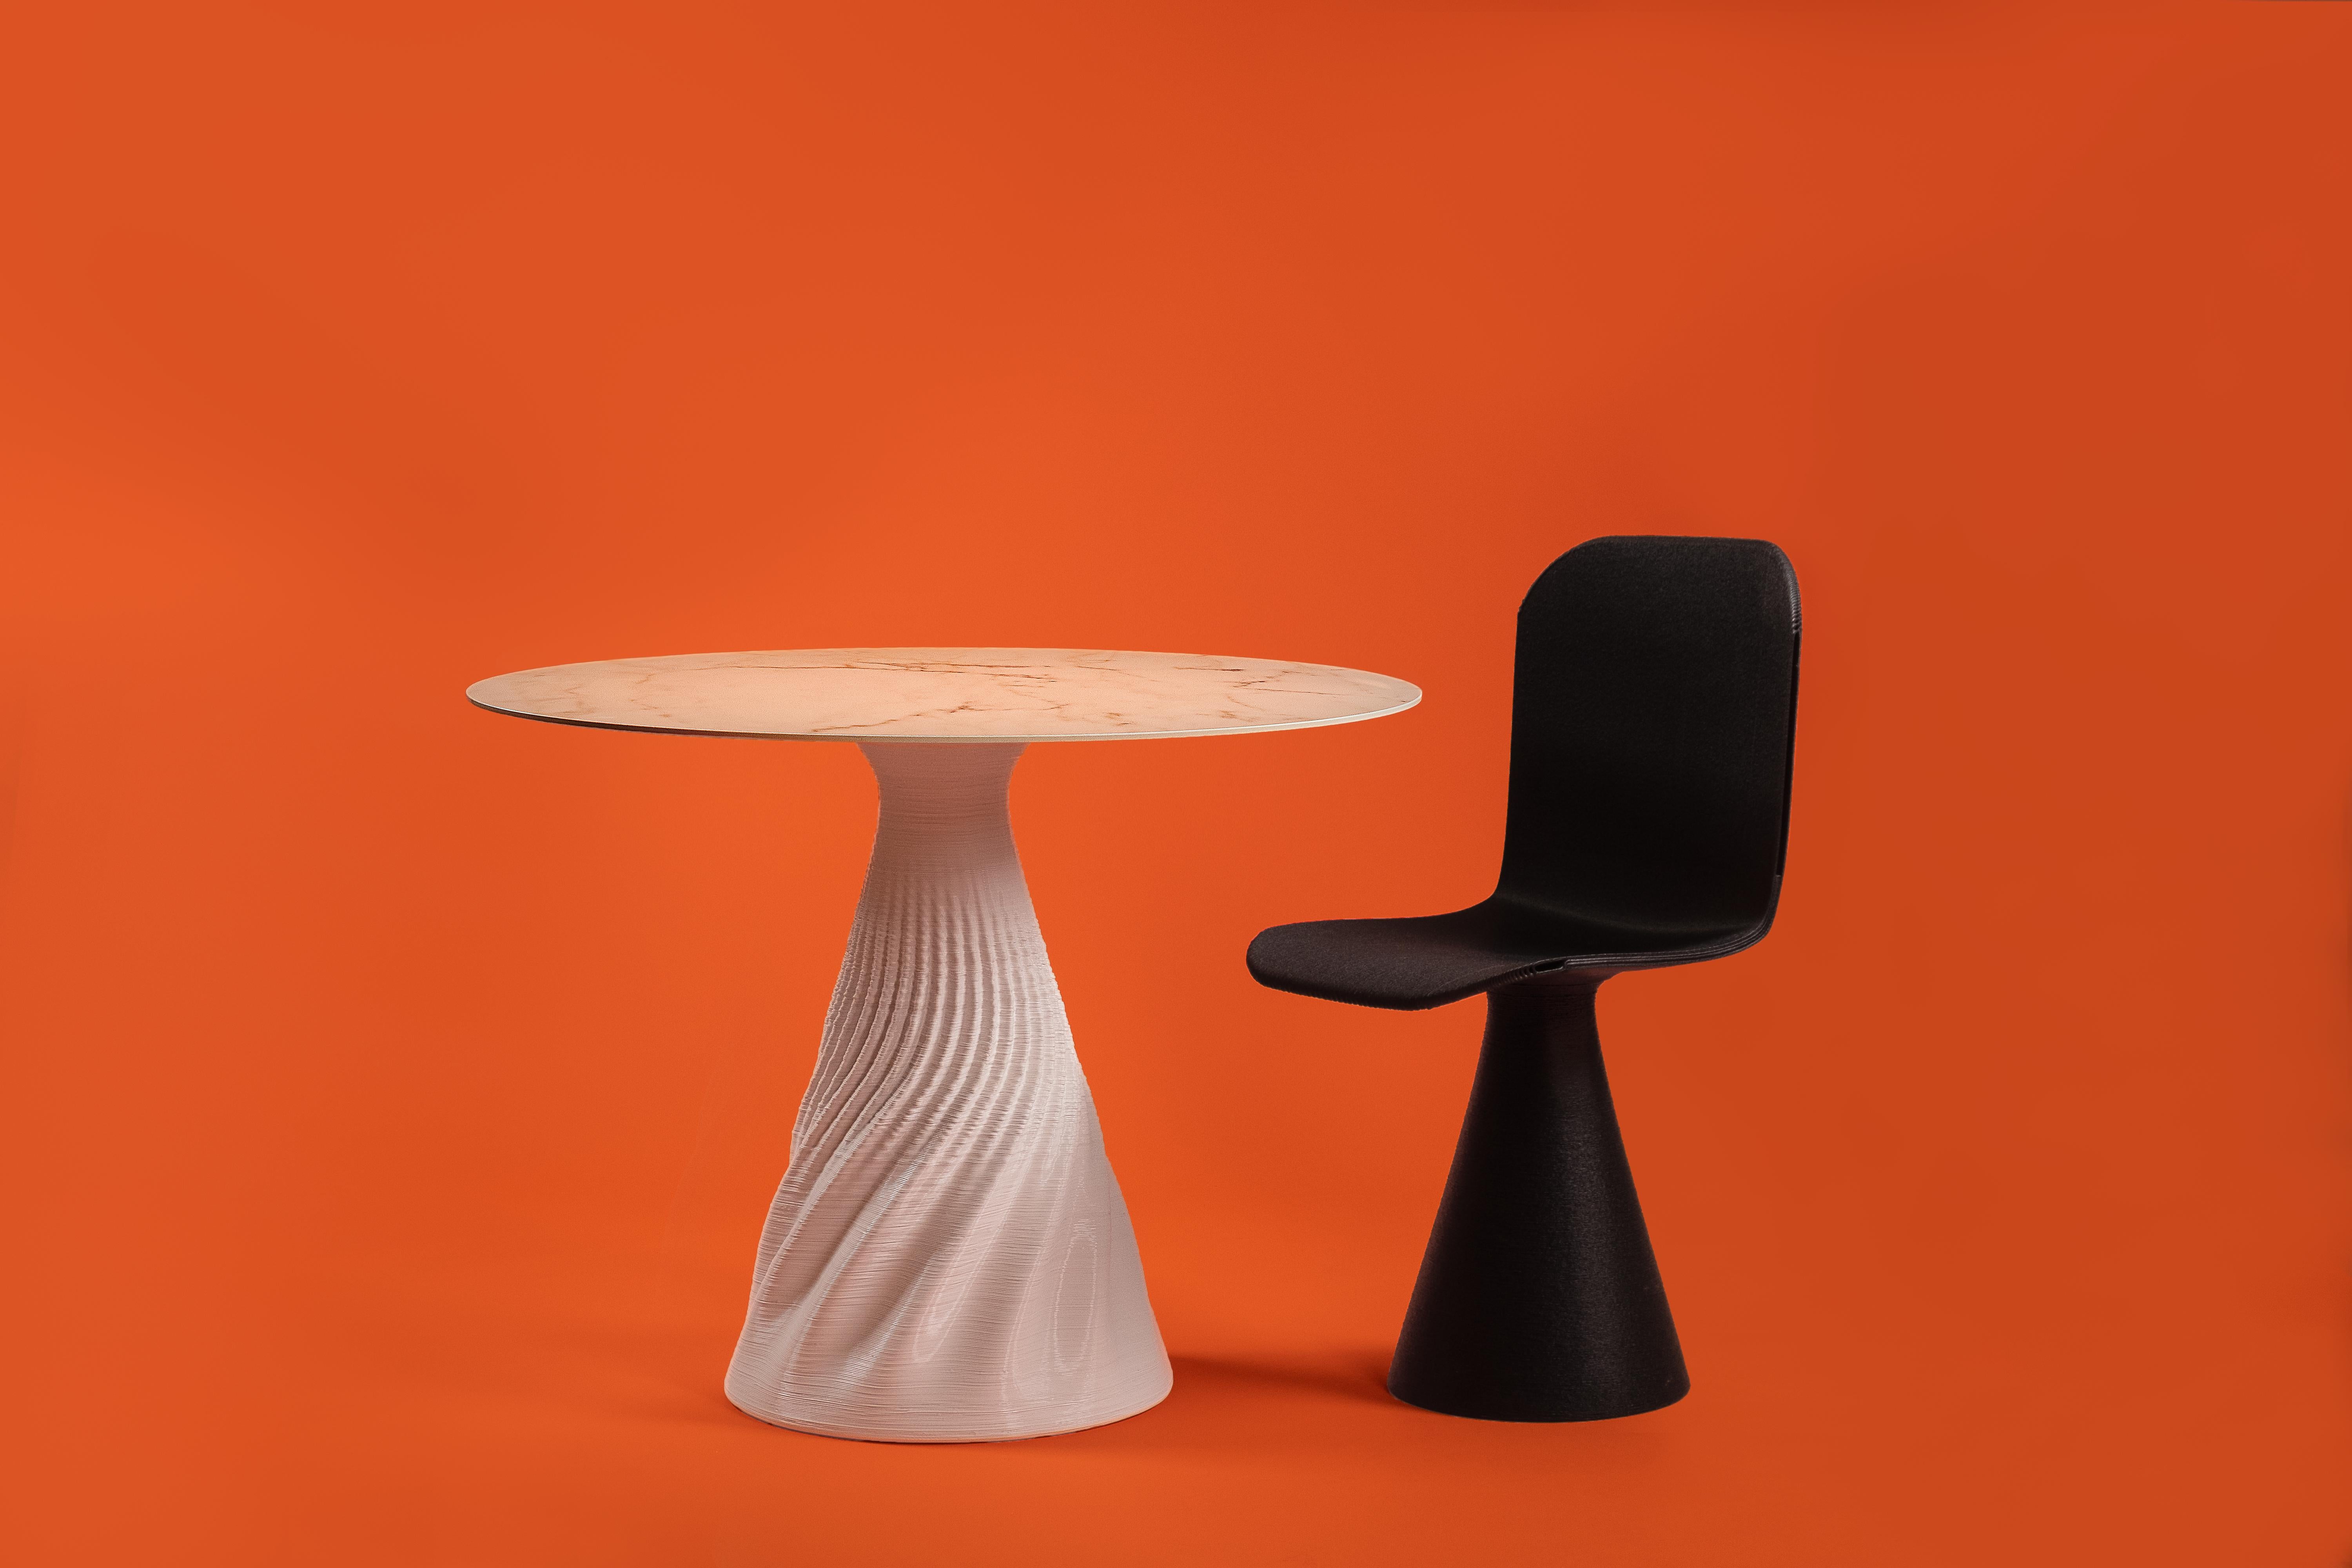 SoHo dining table

An innovative piece of furniture that represent the natural evolution of our traditions. 

This table has been created with innovative technology, always keeping in mind the health and happiness of our environment. It is